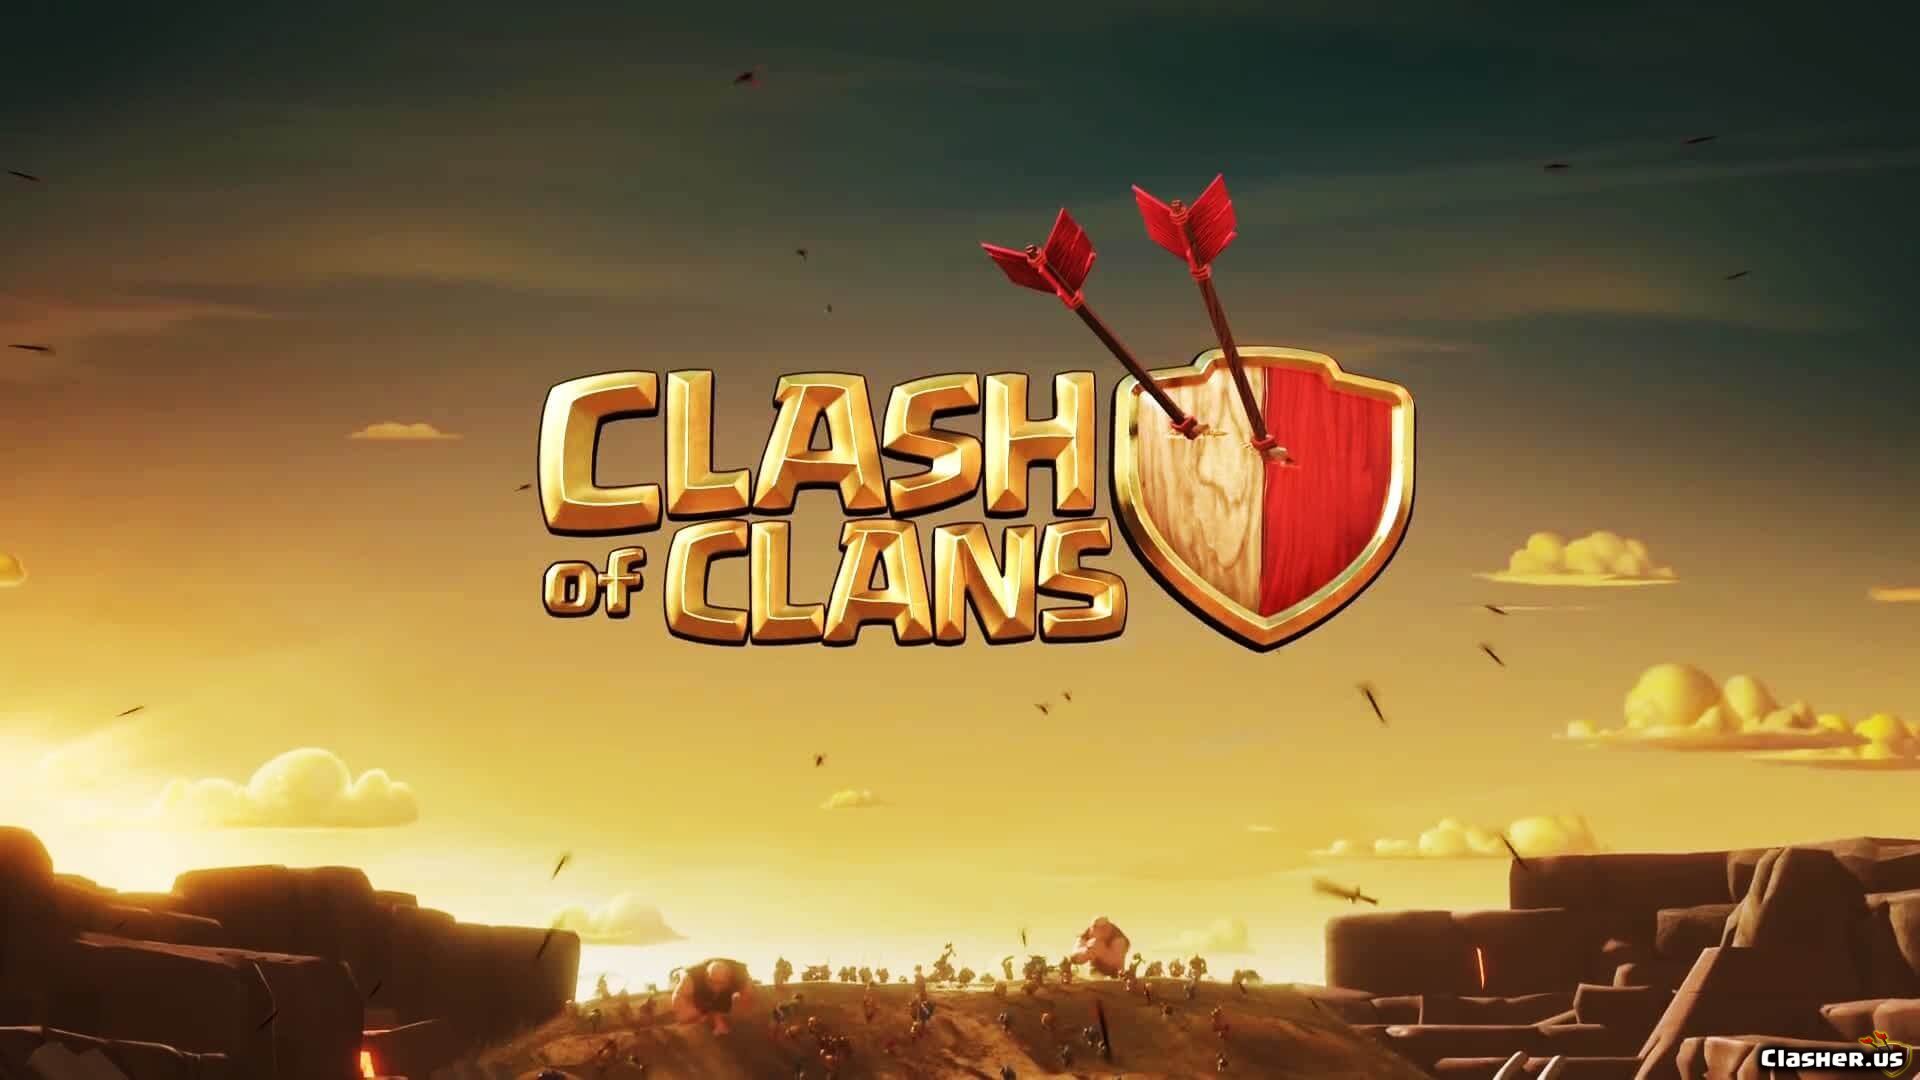 Clash of Clans logo sky of Clans Wallpaper